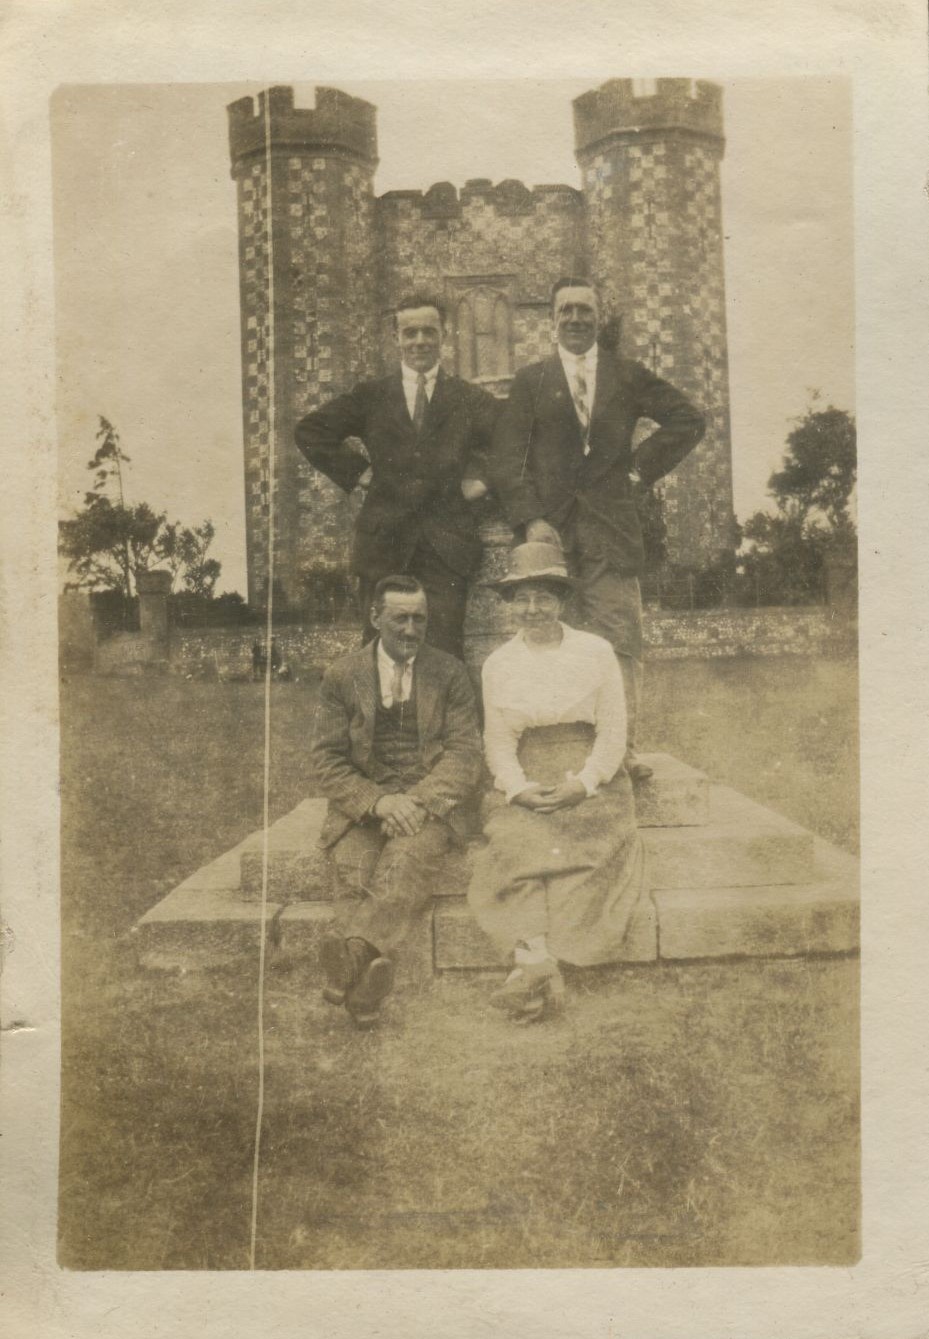 Posed photograph of two men standing in front of a castle with man and women seated in front of them